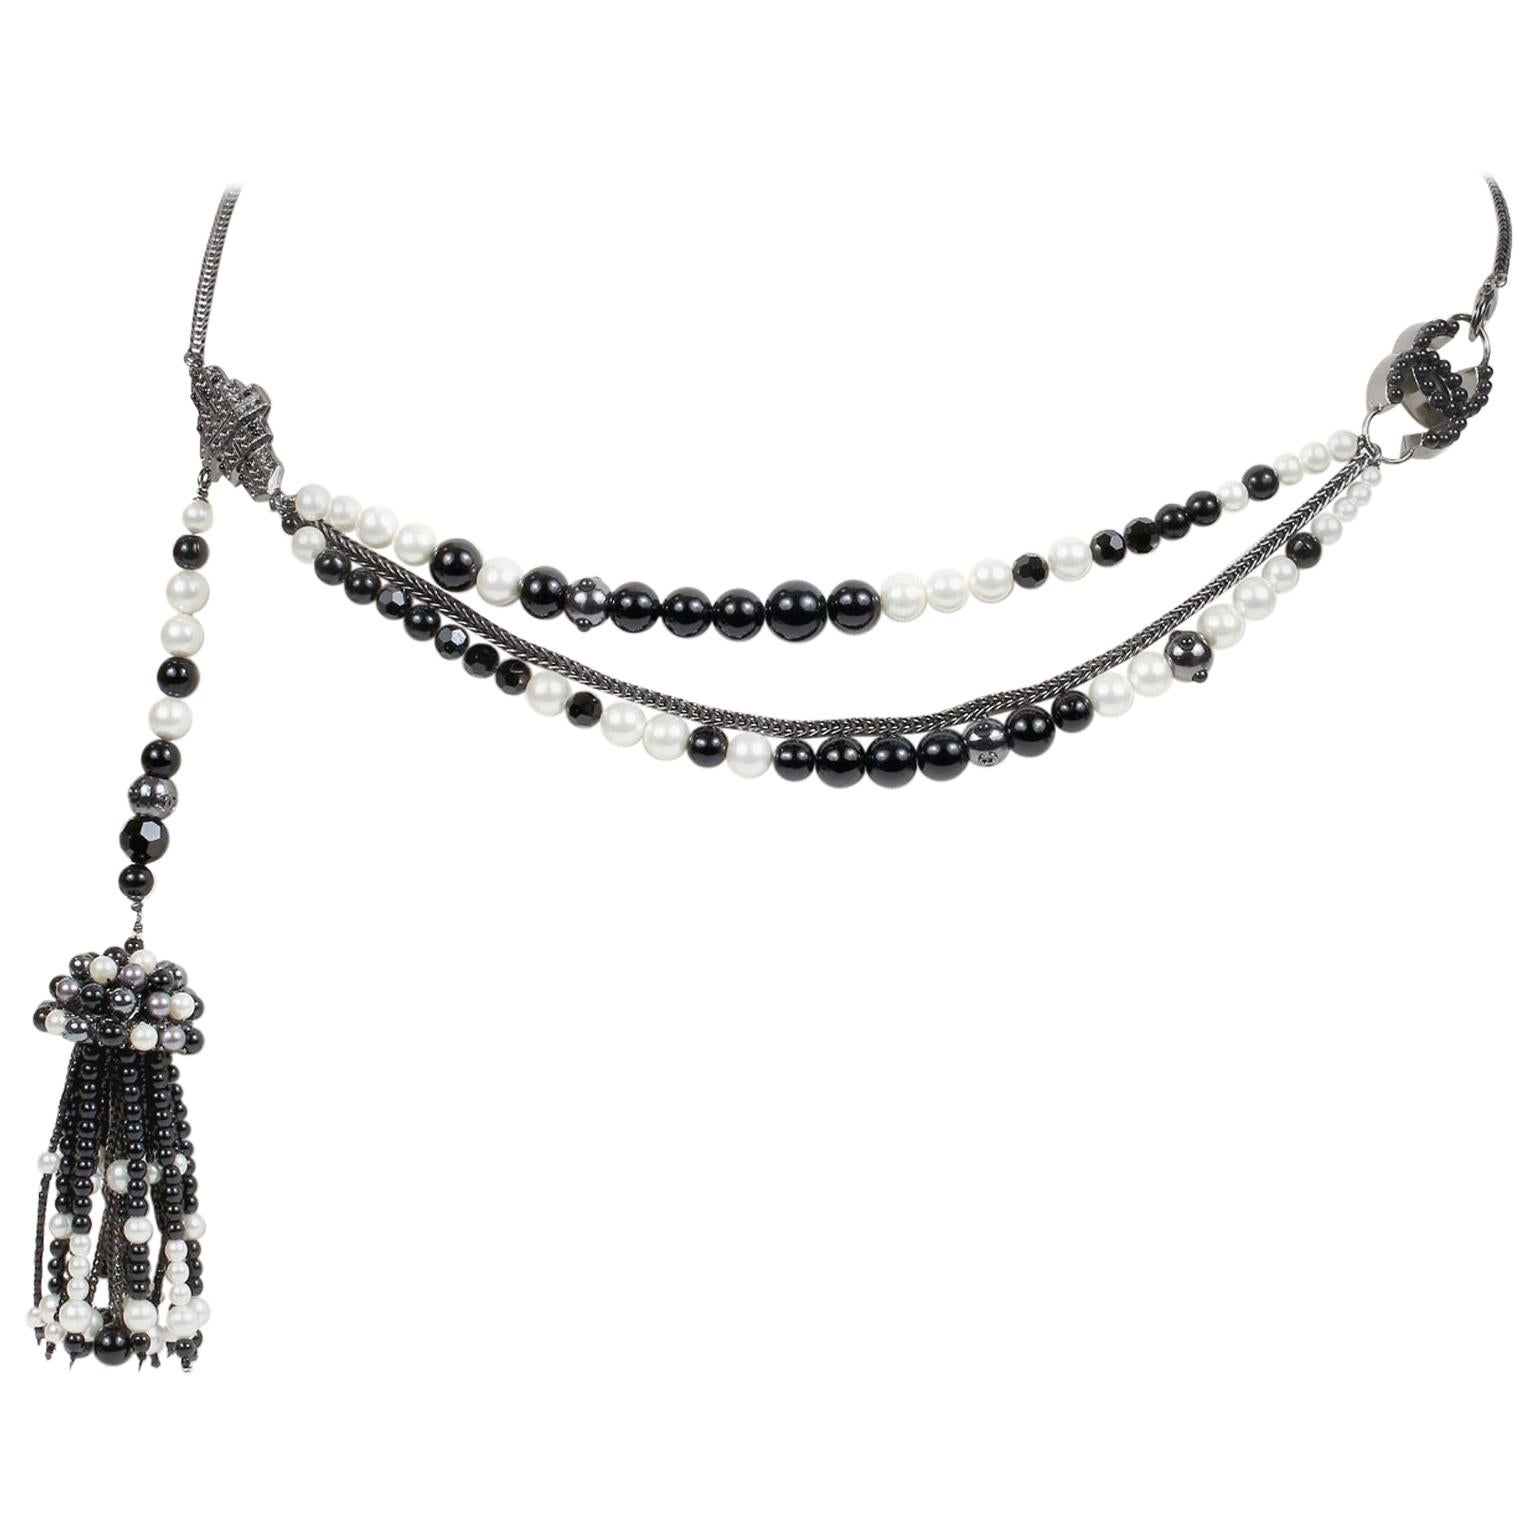 Chanel Black and White Pearl Tassel Belt Necklace